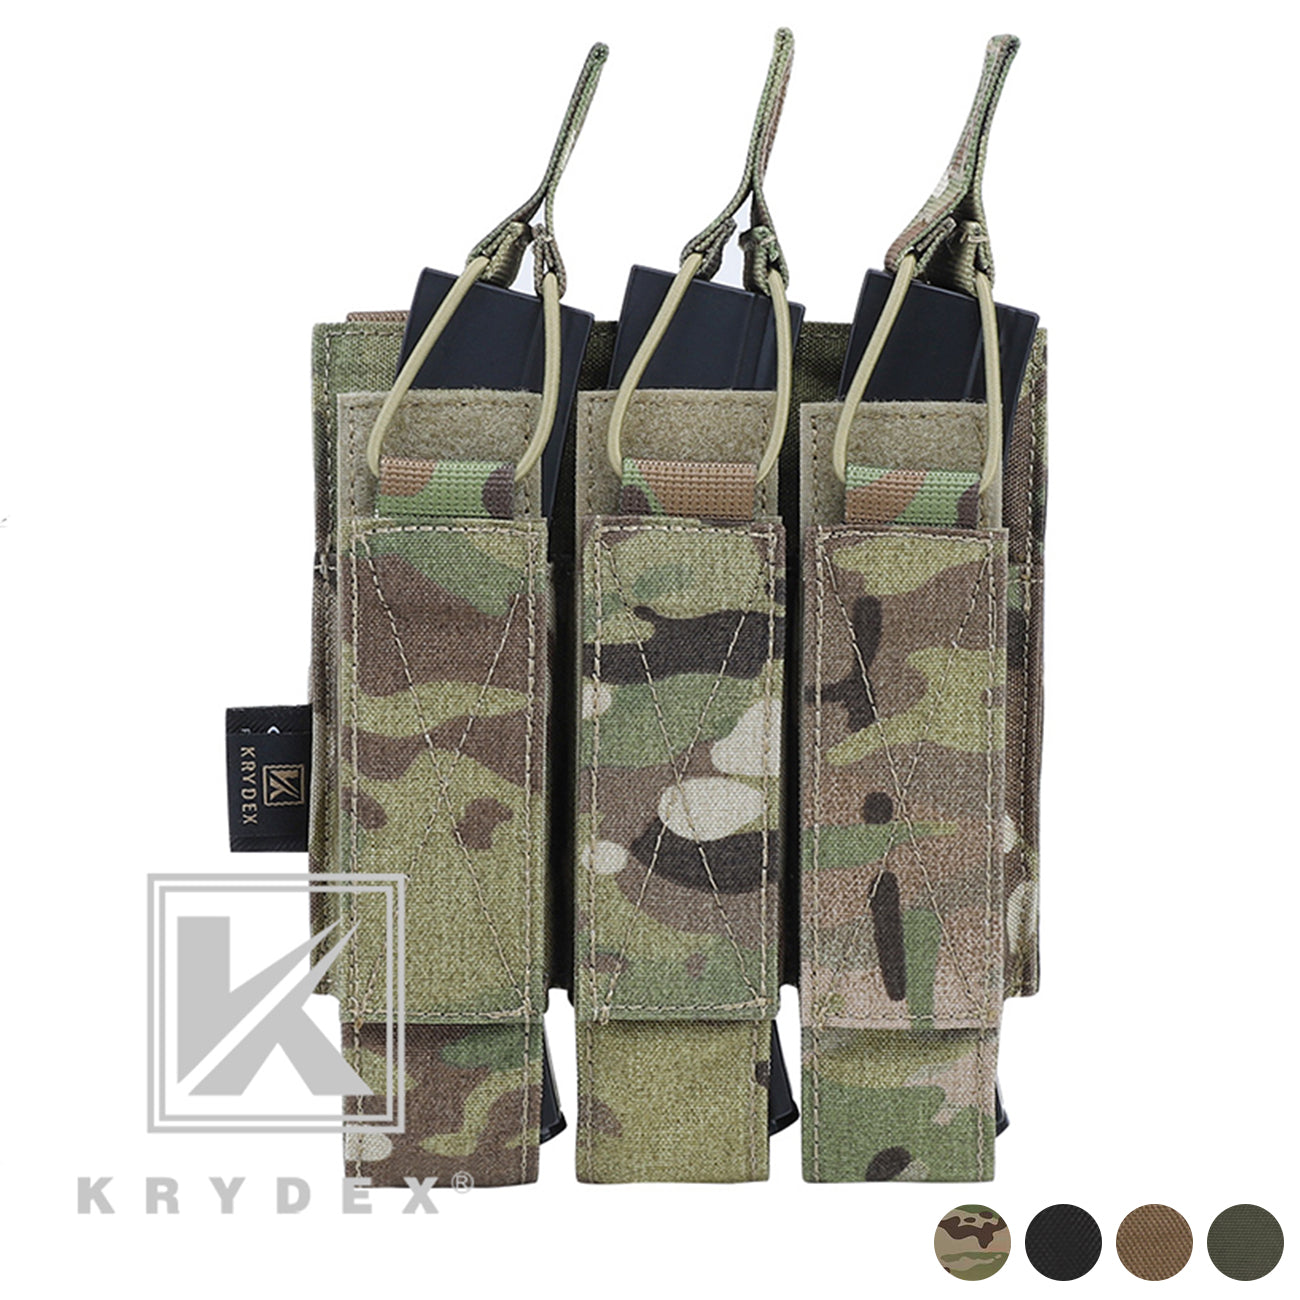 KRYDEX Tactical Triple Submachine Magazine Pouch Mag Carrier Holder MOLLE BLACK 